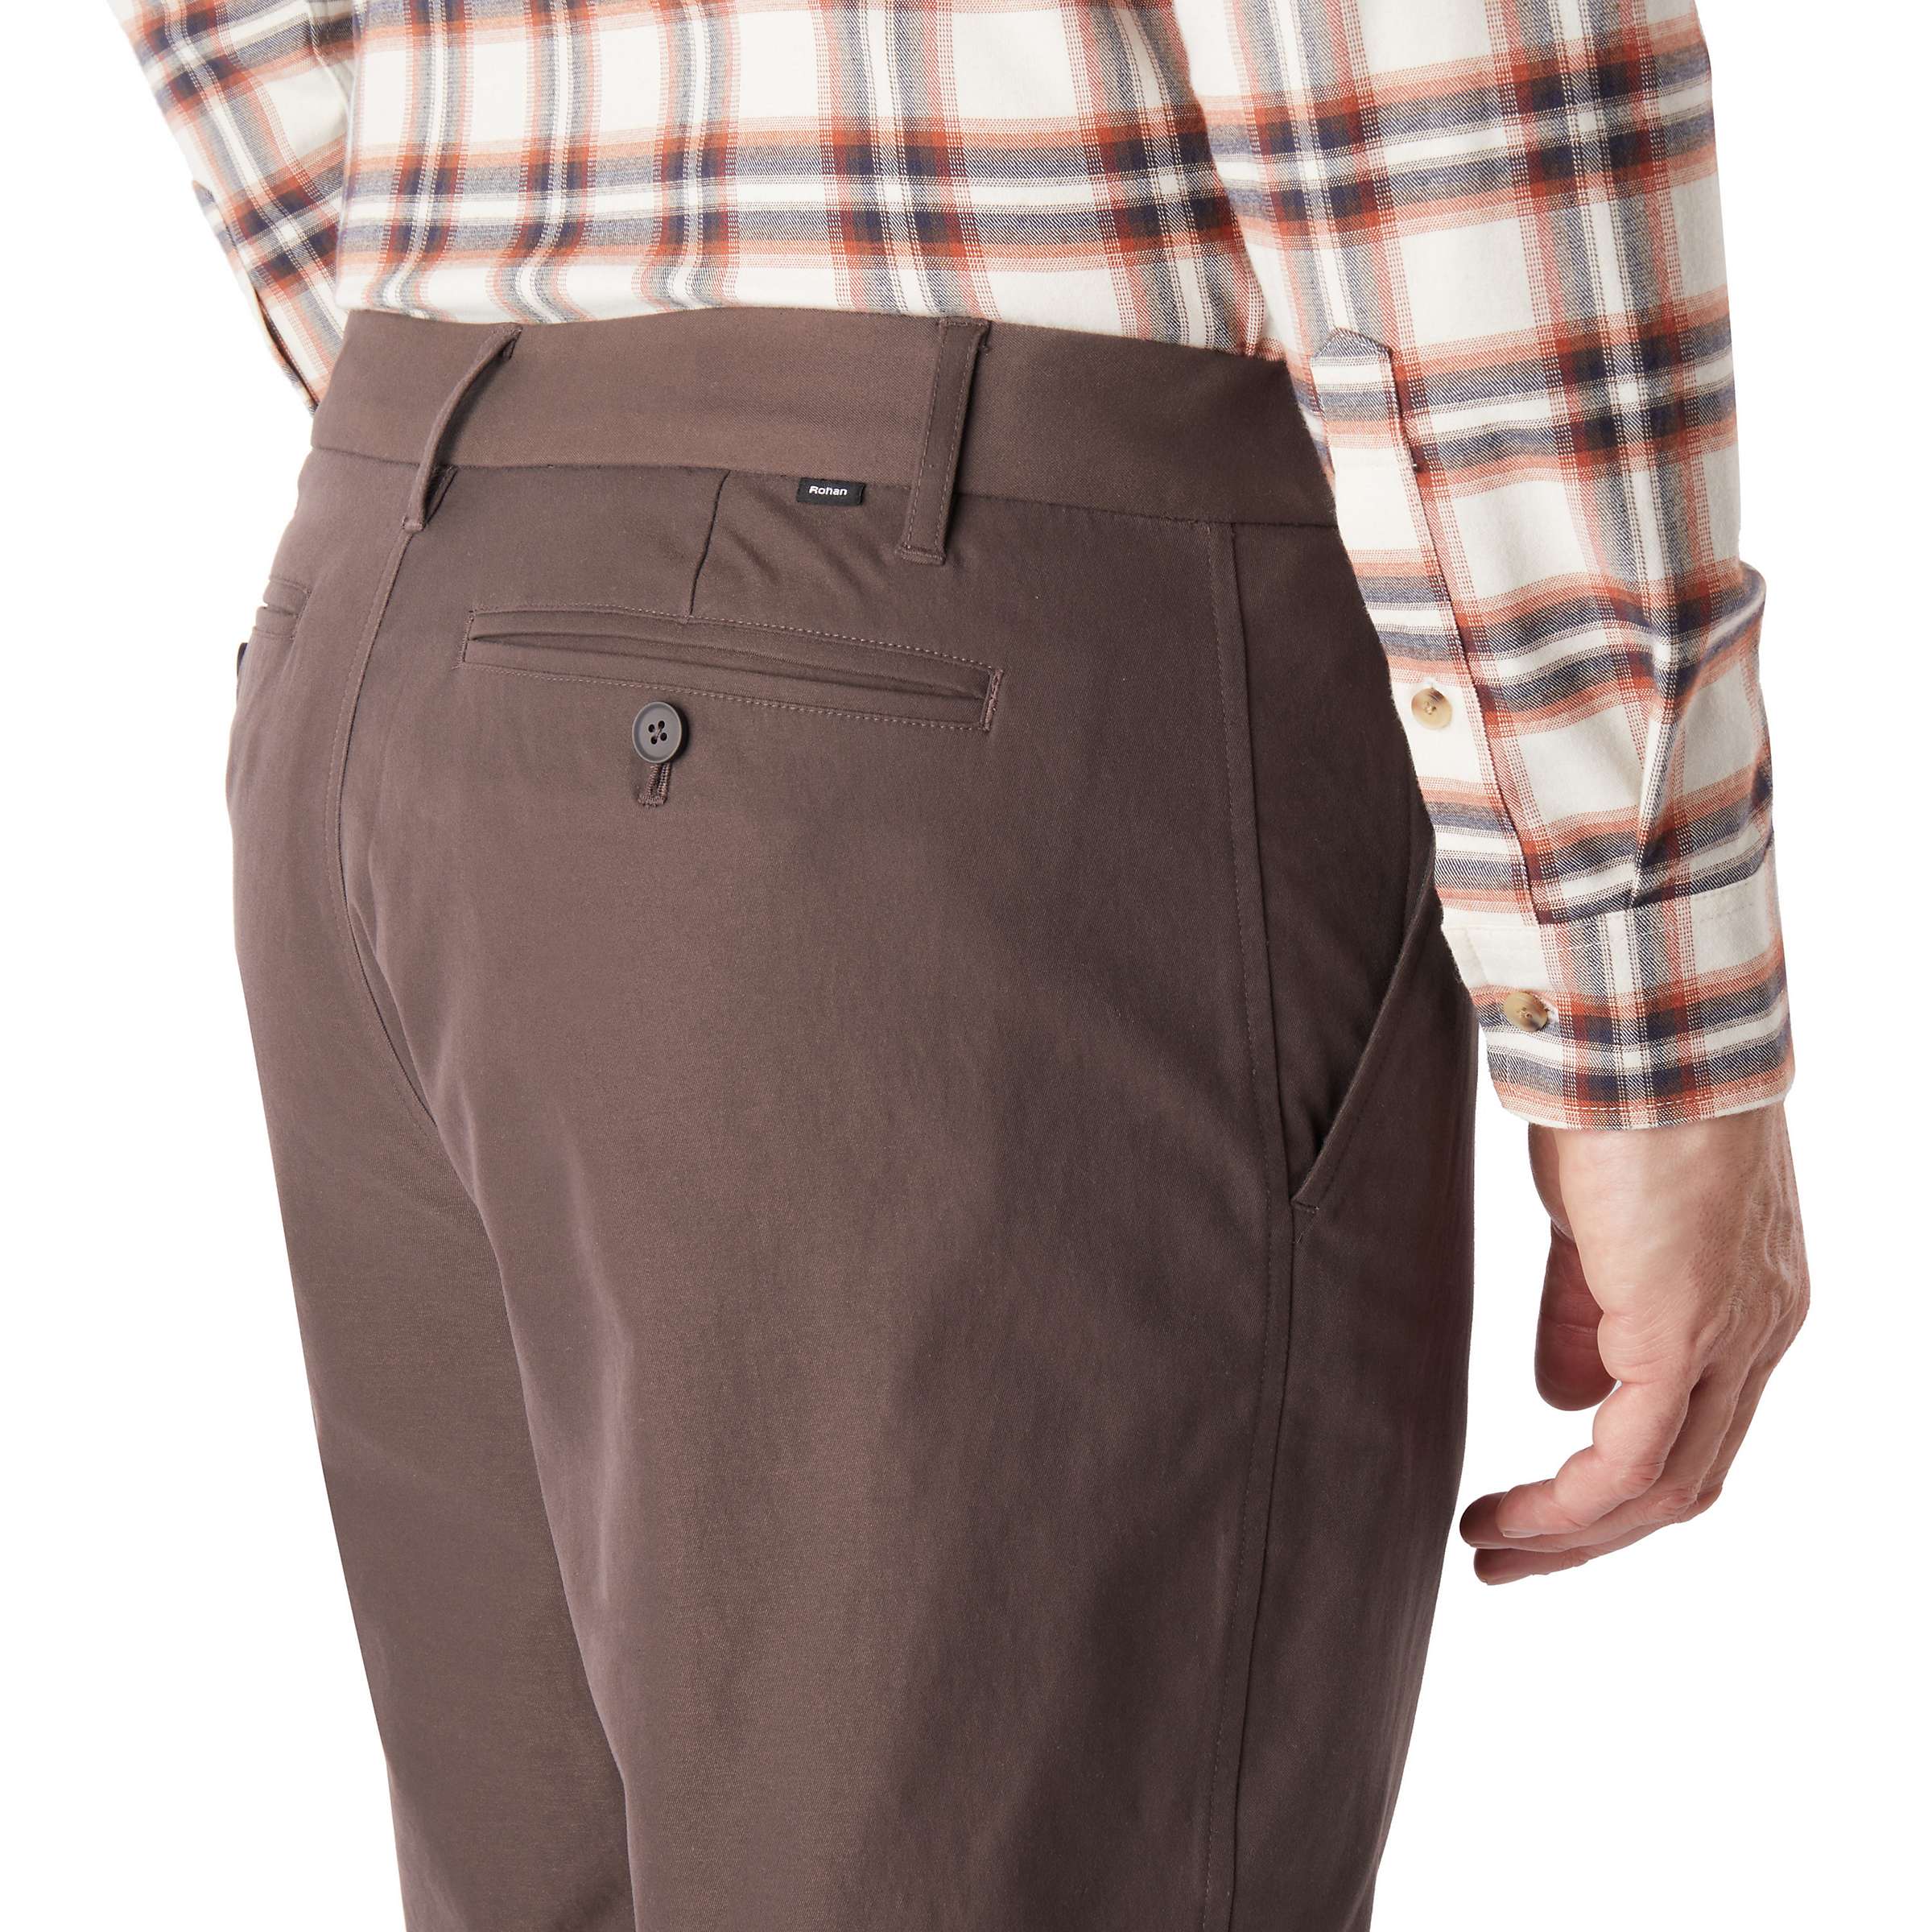 Buy Rohan Winter District Chinos Online at johnlewis.com